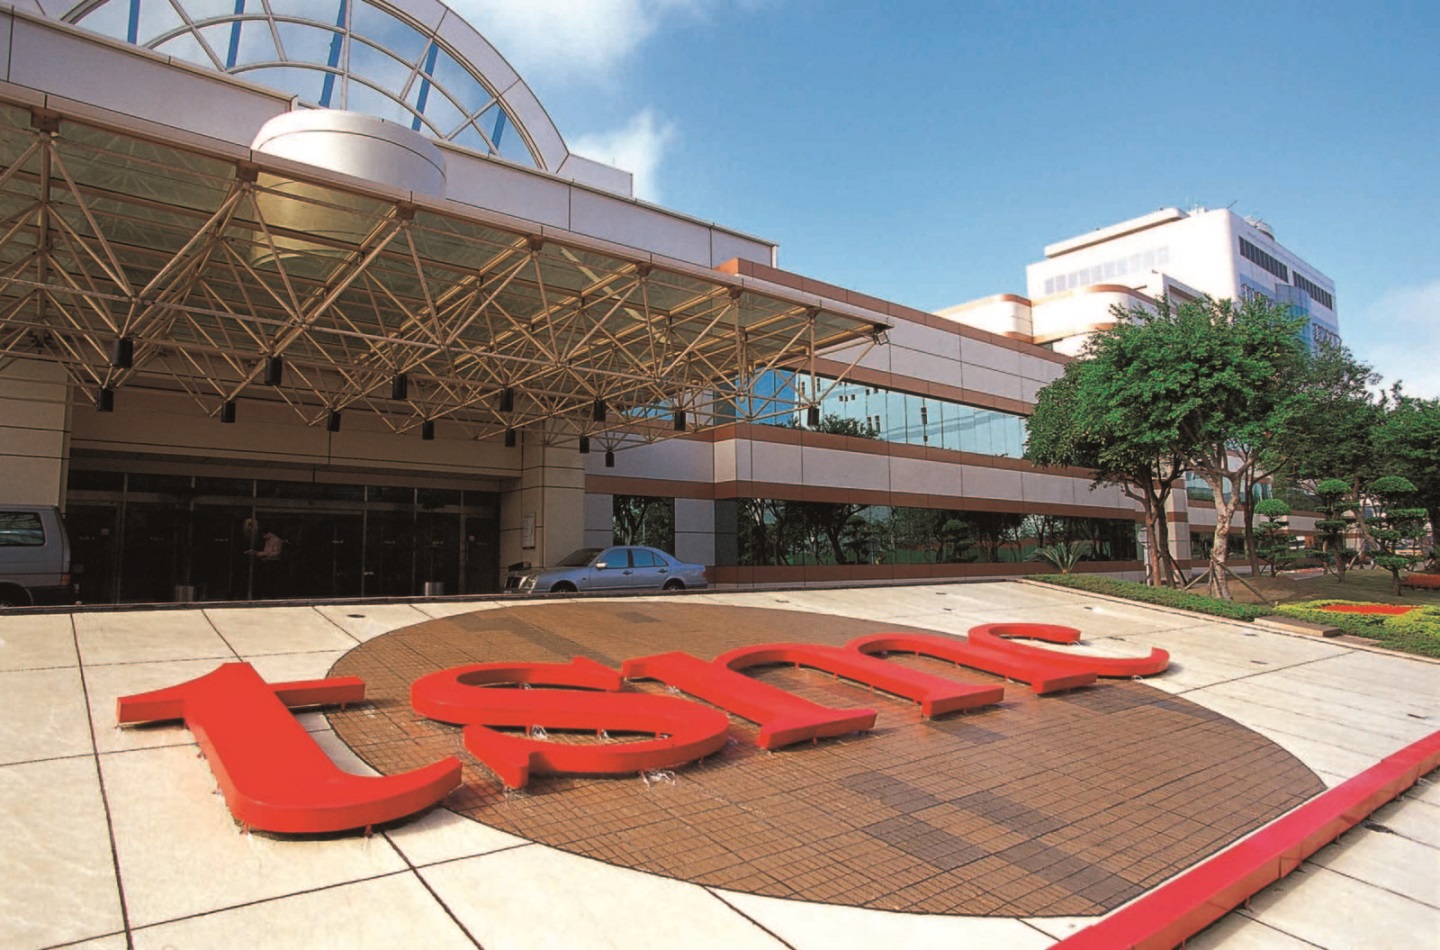 TSMC Says 10nm FinFET On Track, Refutes Rumors of Low Yields